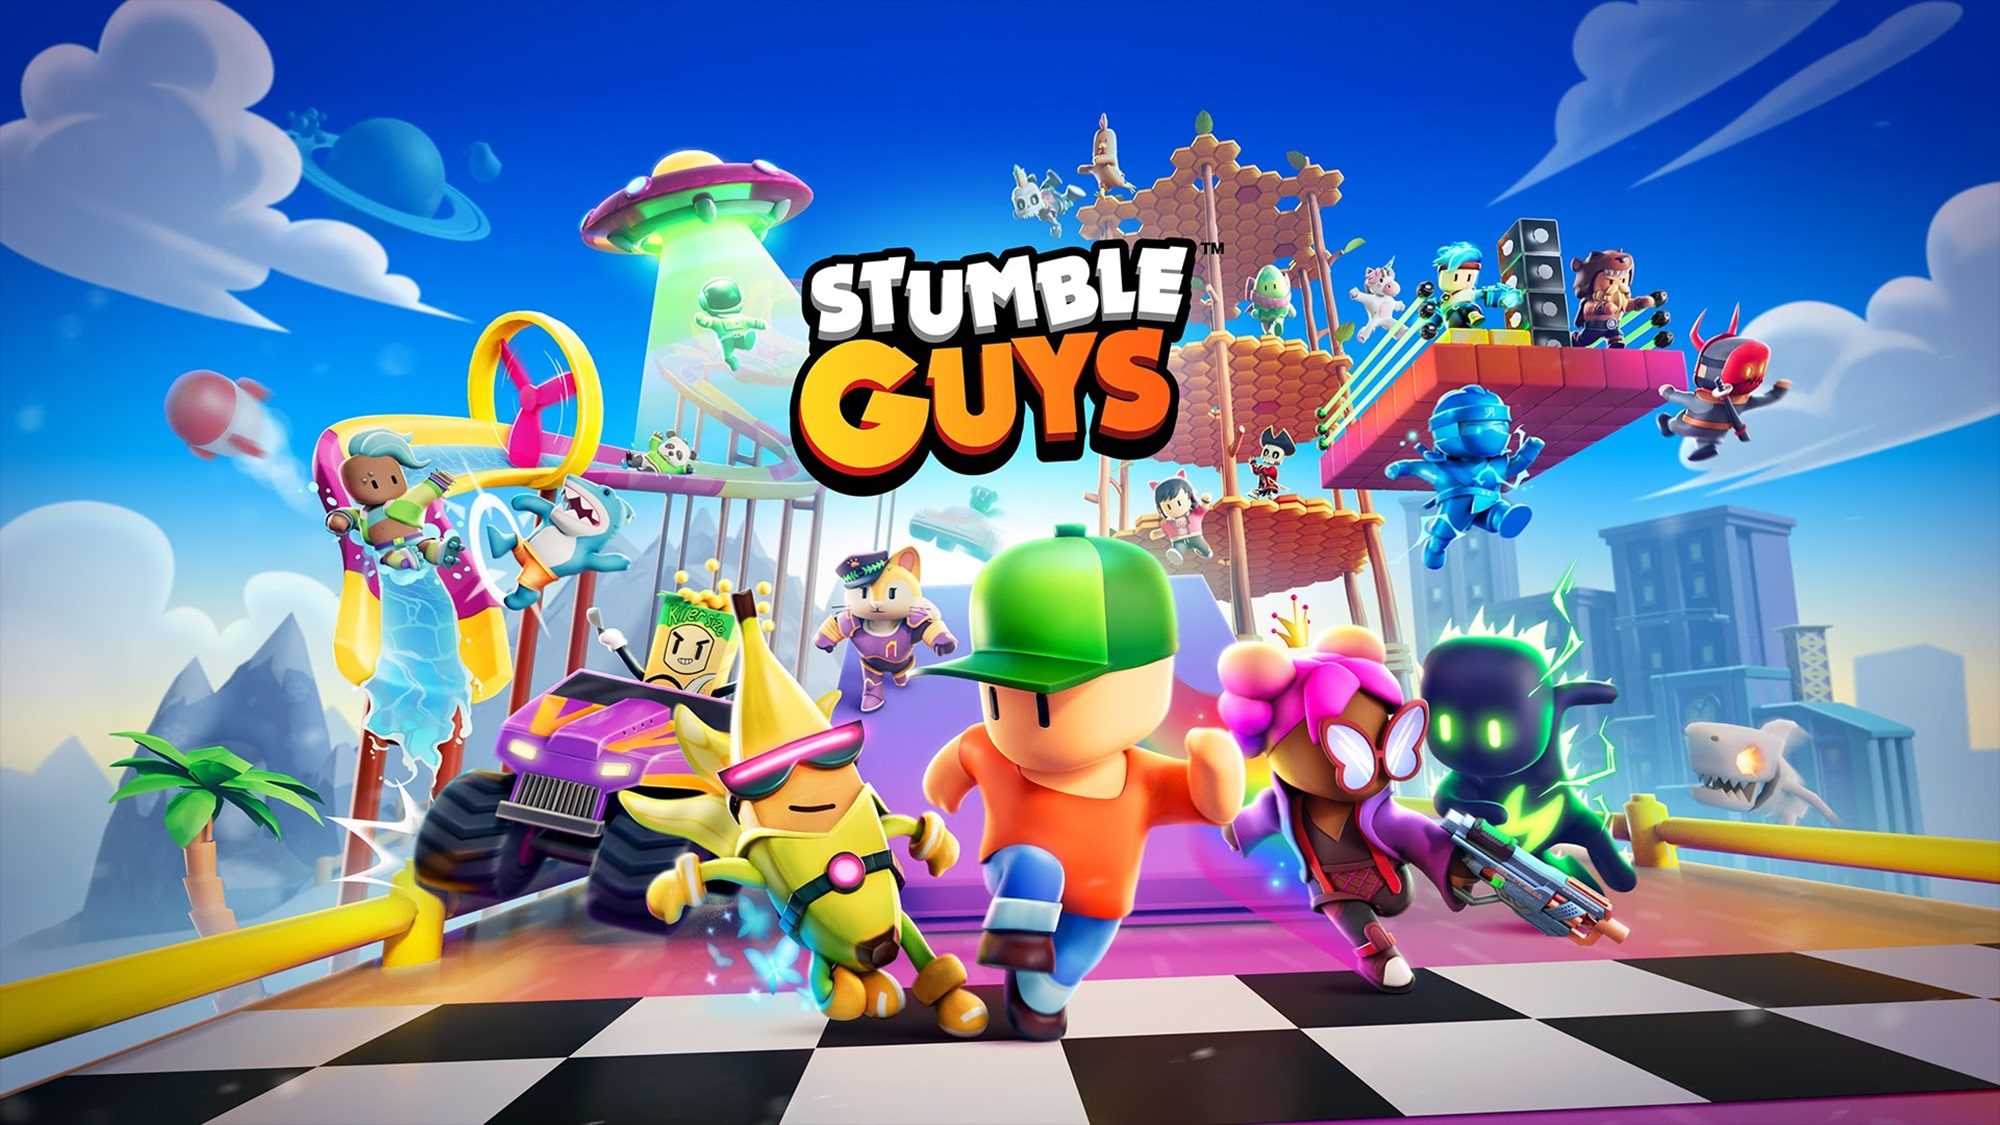 Scopely finally brings Stumble Guys to console with Xbox launch